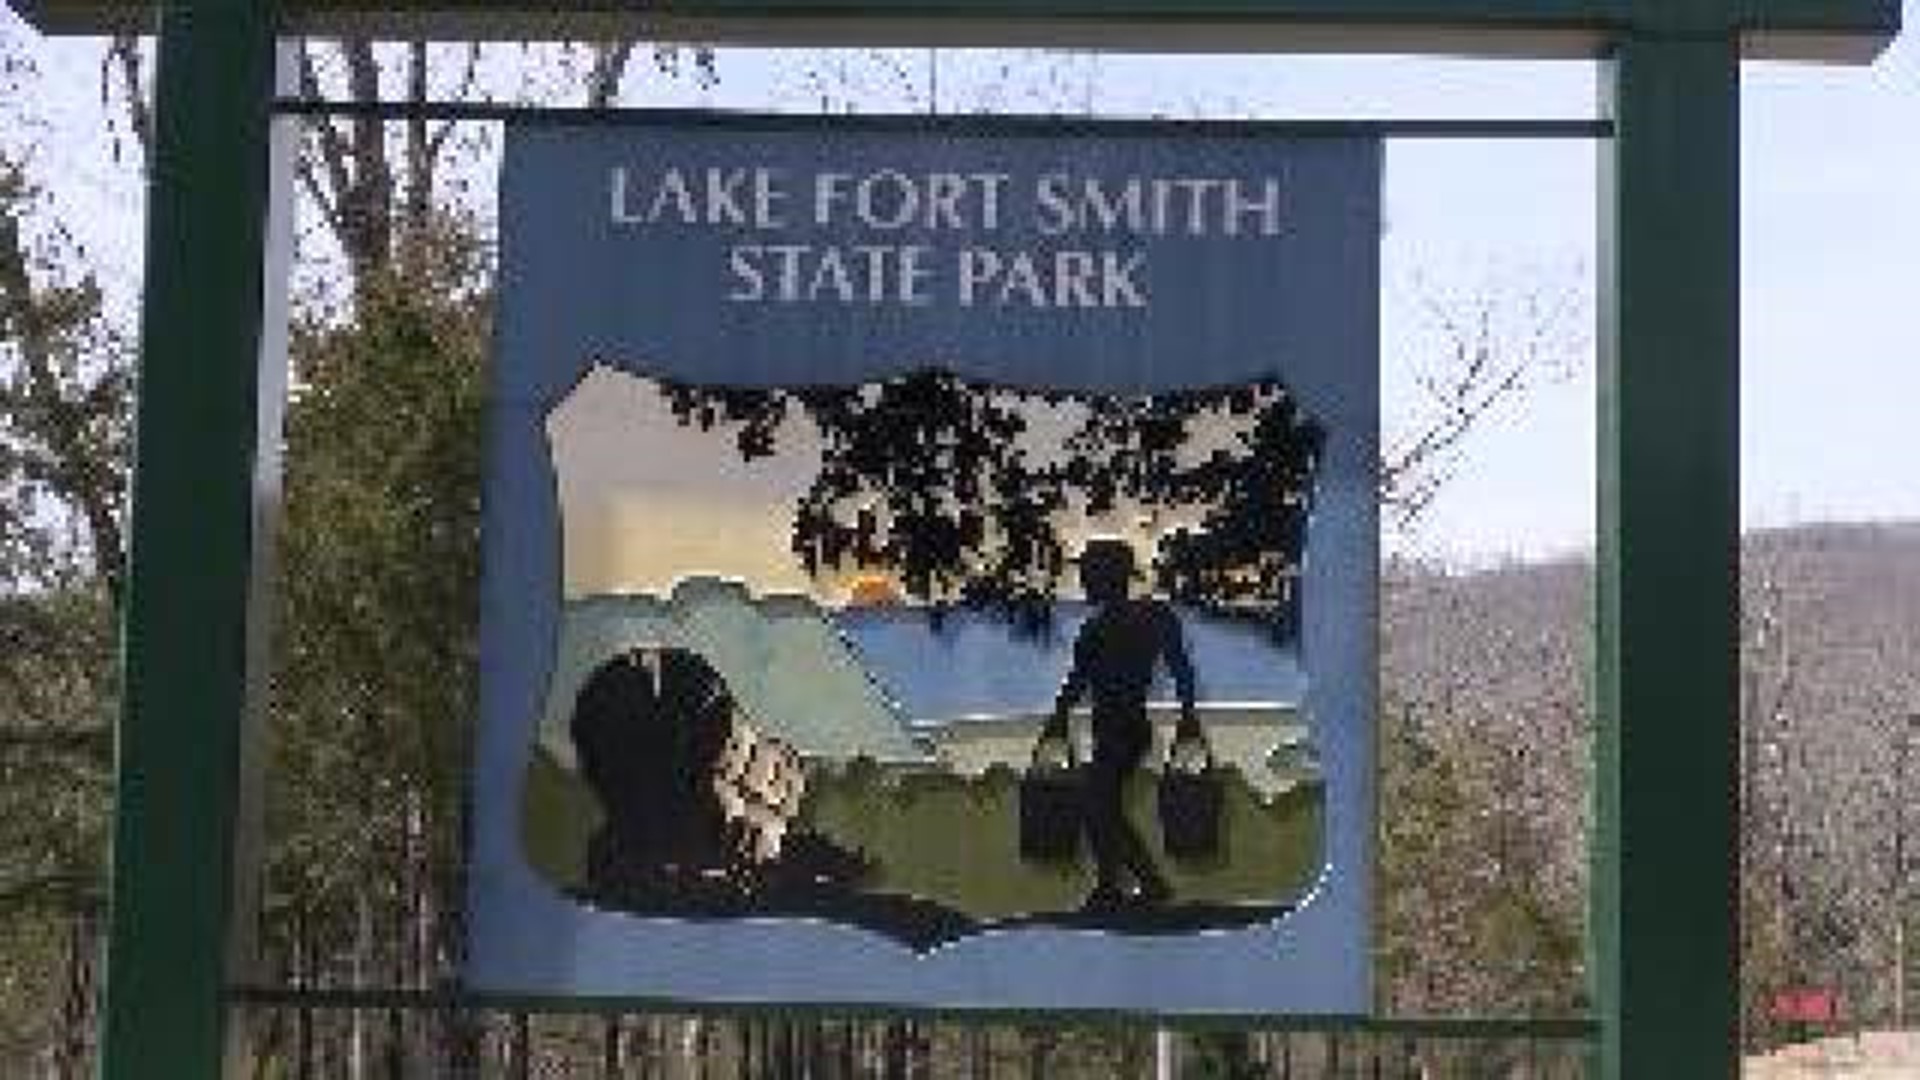 New Cabins Unveiled at Lake Fort Smith State Park